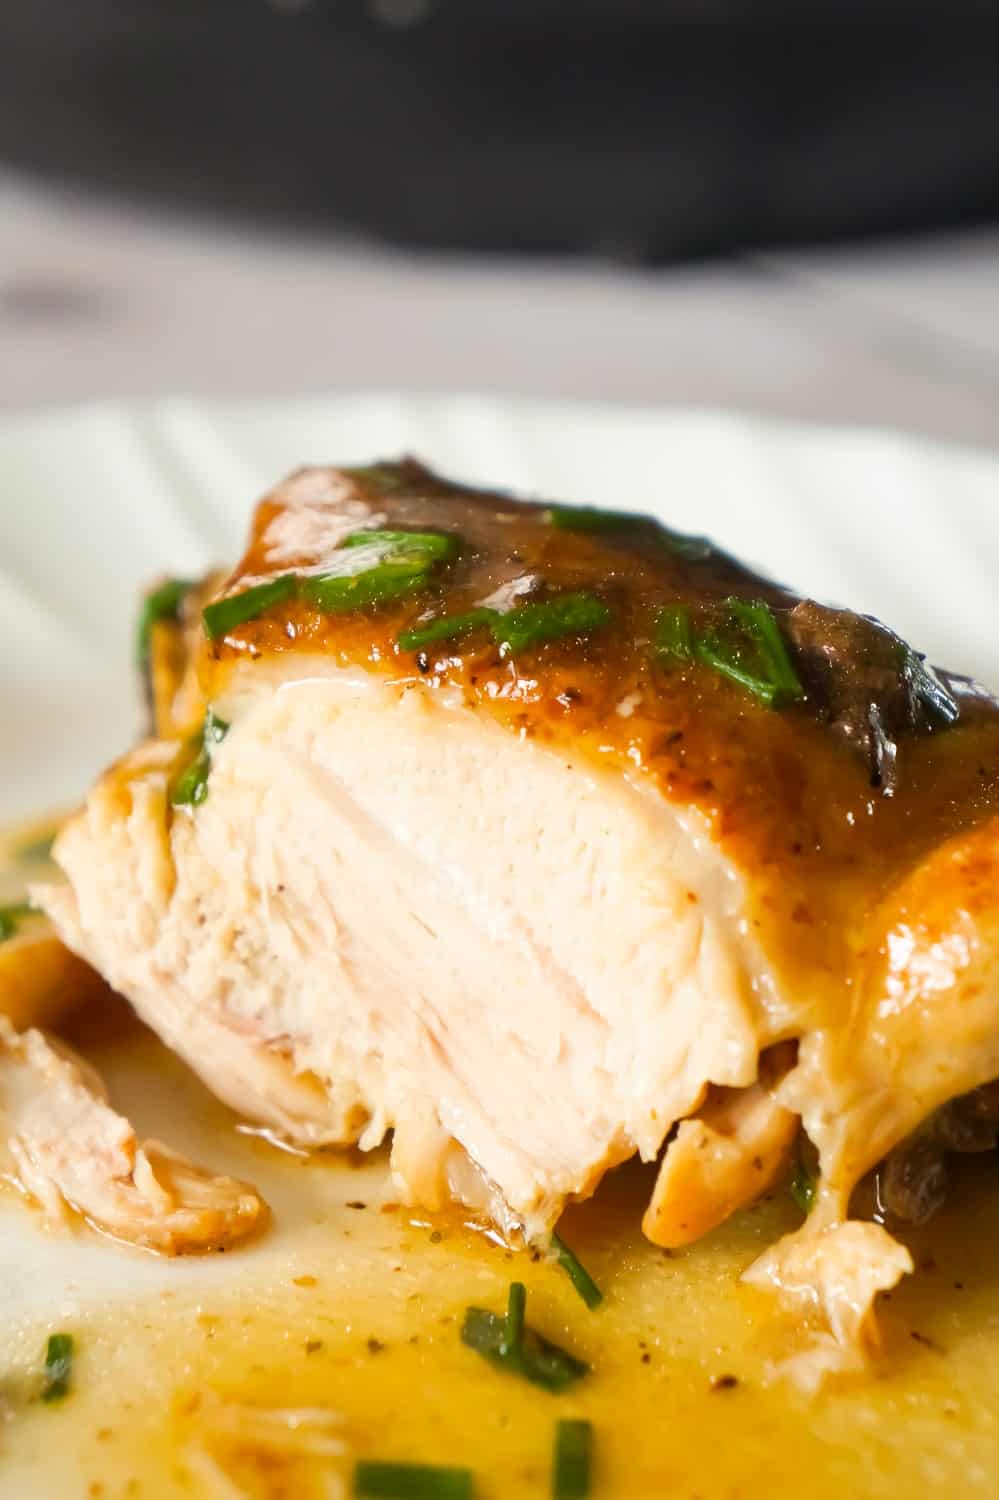 Instant Pot Chicken Thighs is a delicious pressure cooker chicken recipe with gravy cooked all in one pot.